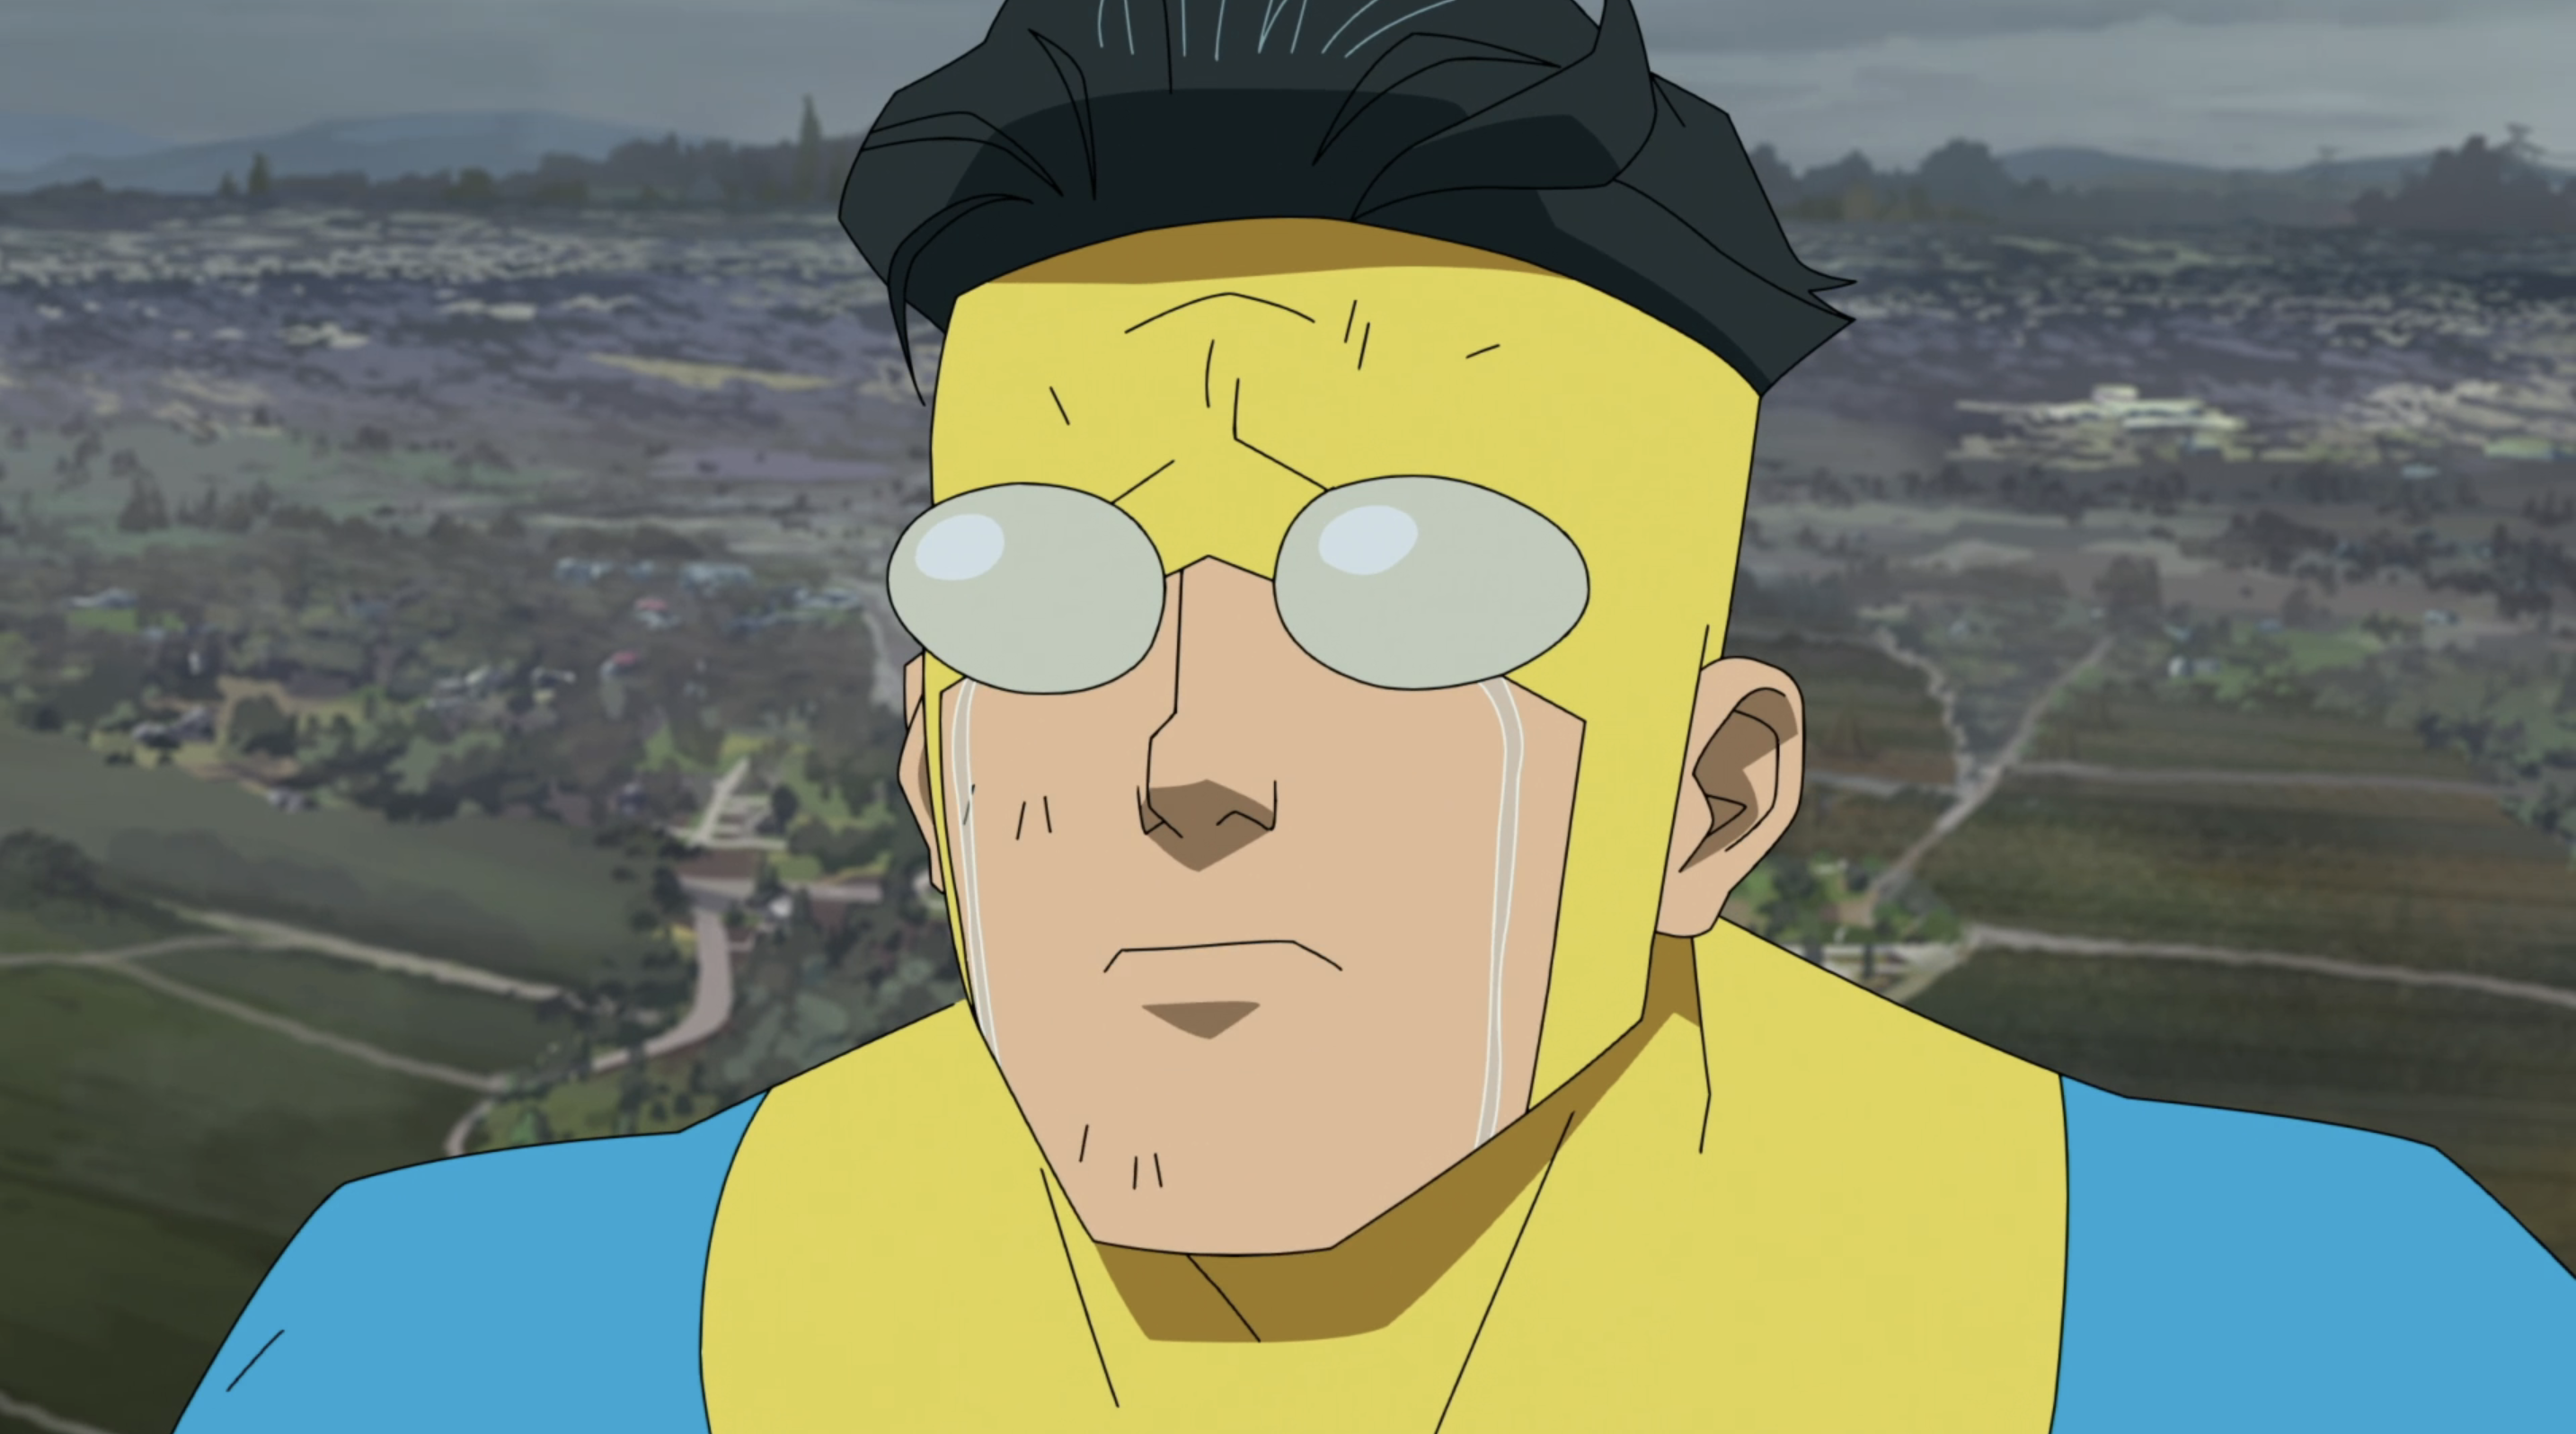 Mark Grayson, a dark-haired young man in a sky-blue and yellow spandex super-suit, cries in closeup in season 1 of the animated series Invincible